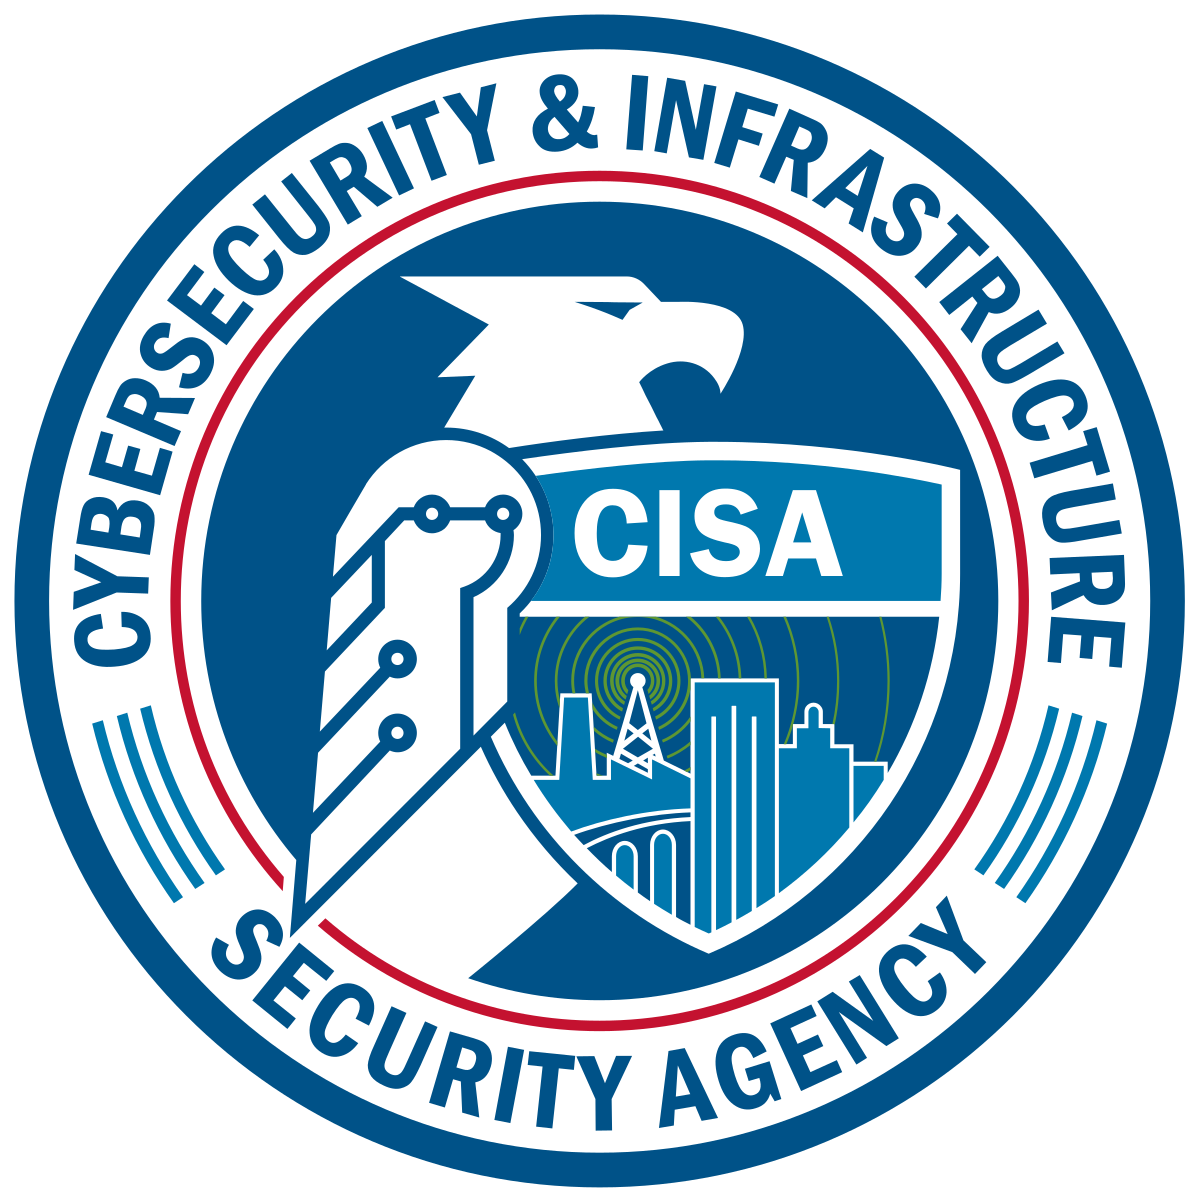 Cybersecurity and Infrastructure Security Agency - Wikipedia